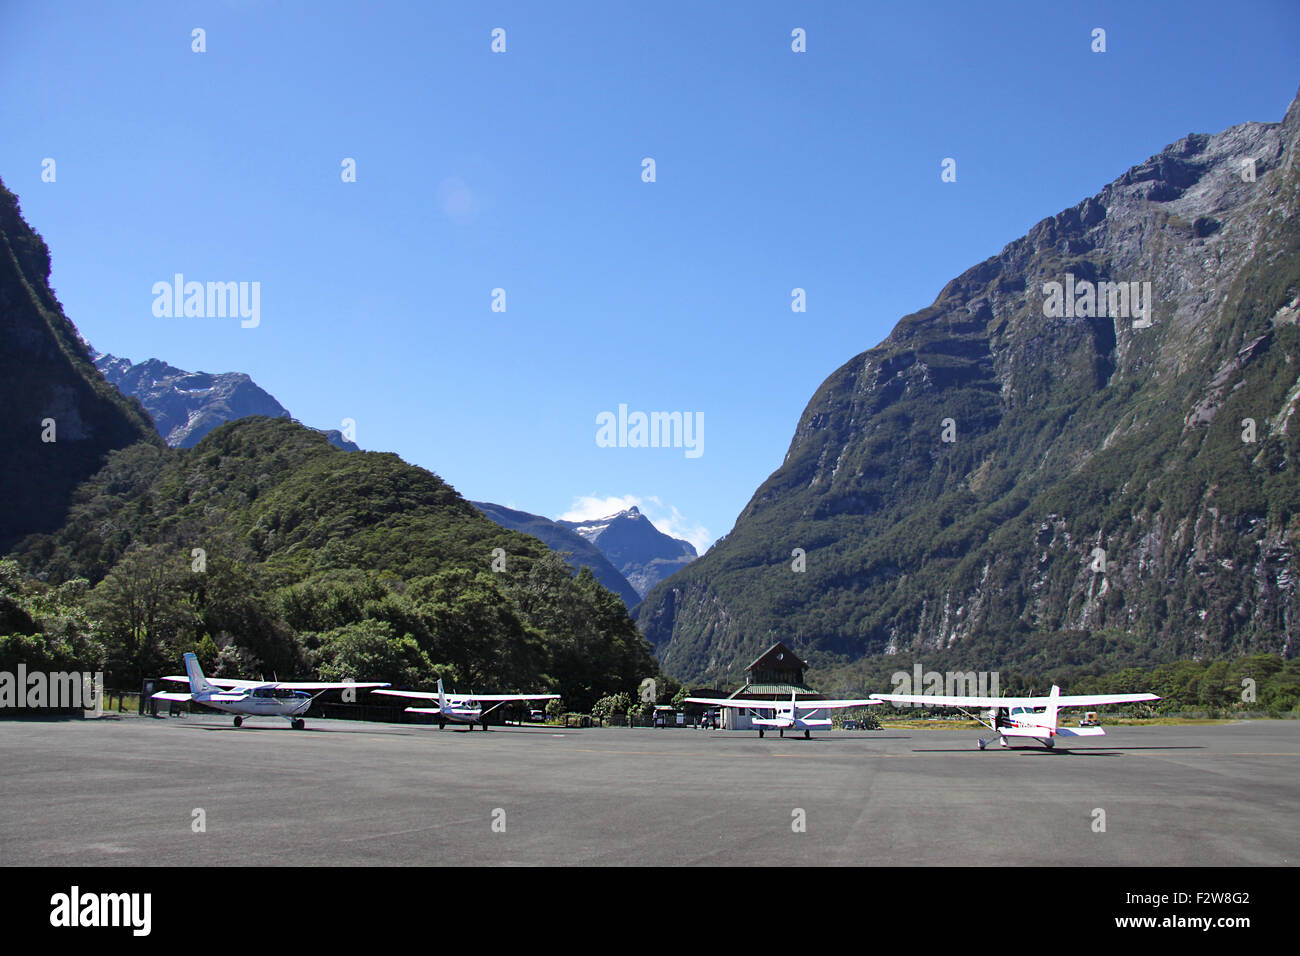 Small planes on the runway of the Milford Sound Airport, MFN, NZMF, in Milford Sound, New Zealand Stock Photo